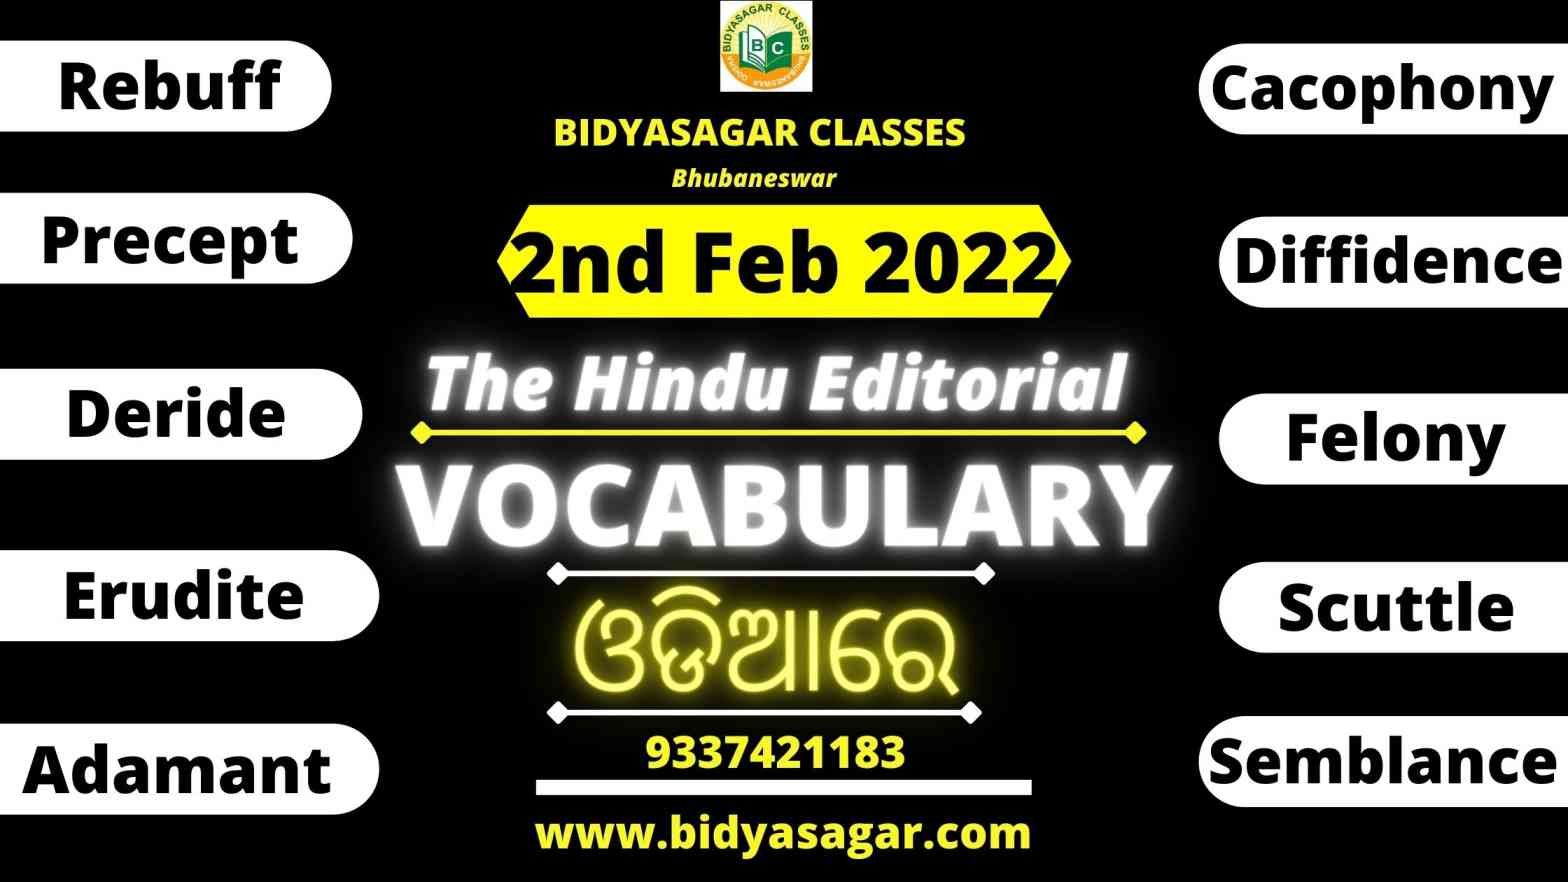 The Hindu Editorial Vocabulary of 2nd february 2022